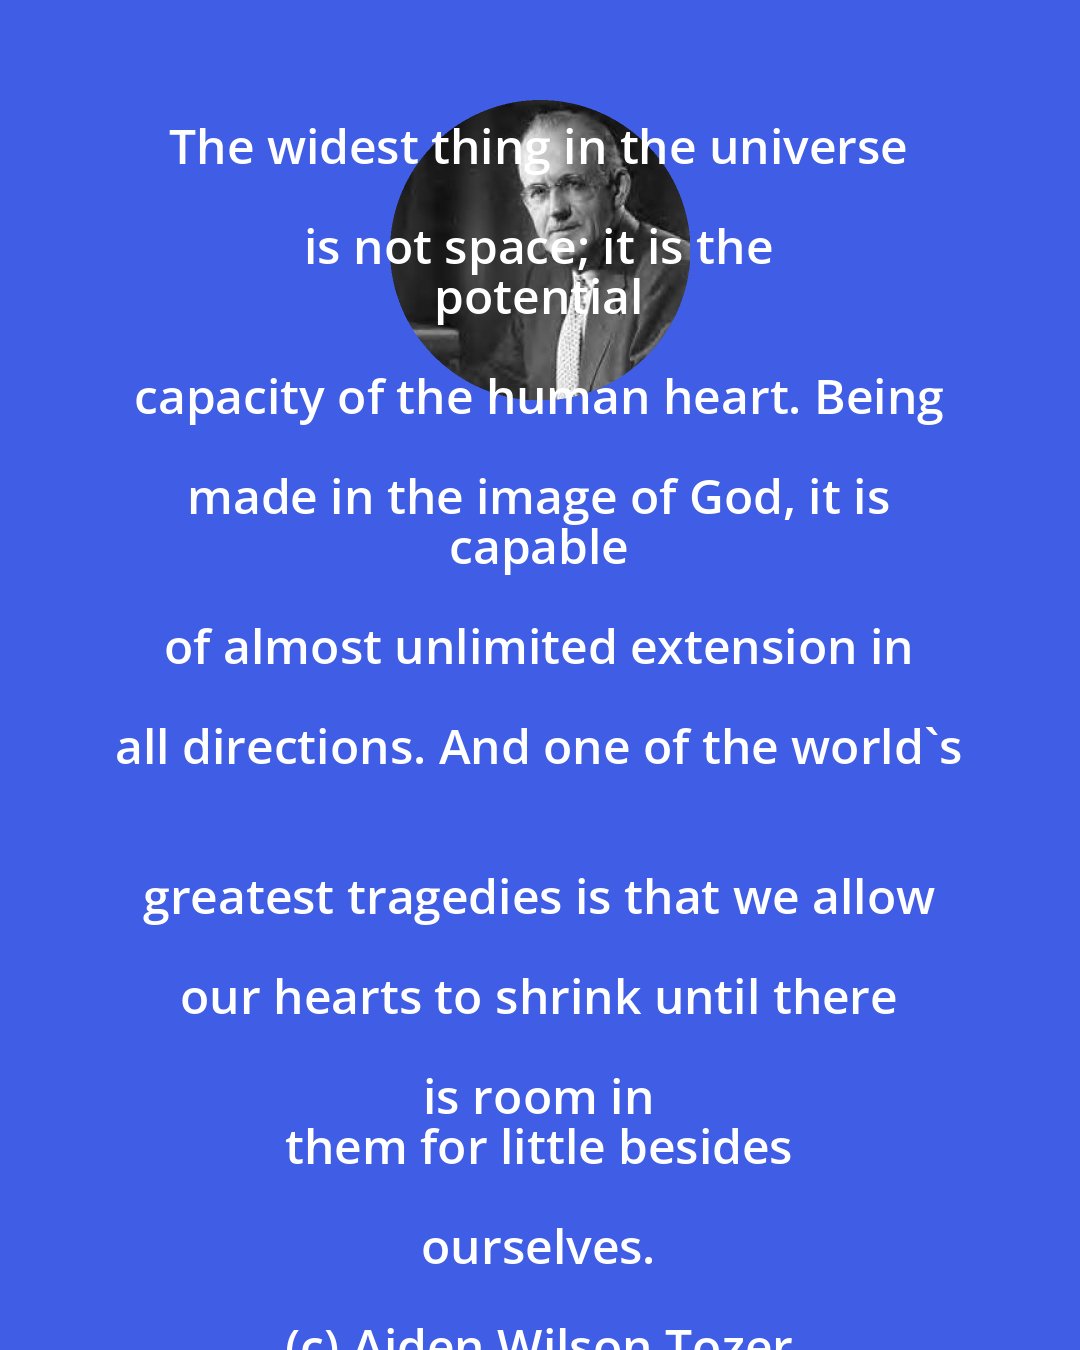 Aiden Wilson Tozer: The widest thing in the universe is not space; it is the 
 potential capacity of the human heart. Being made in the image of God, it is 
 capable of almost unlimited extension in all directions. And one of the world's 
 greatest tragedies is that we allow our hearts to shrink until there is room in 
 them for little besides ourselves.